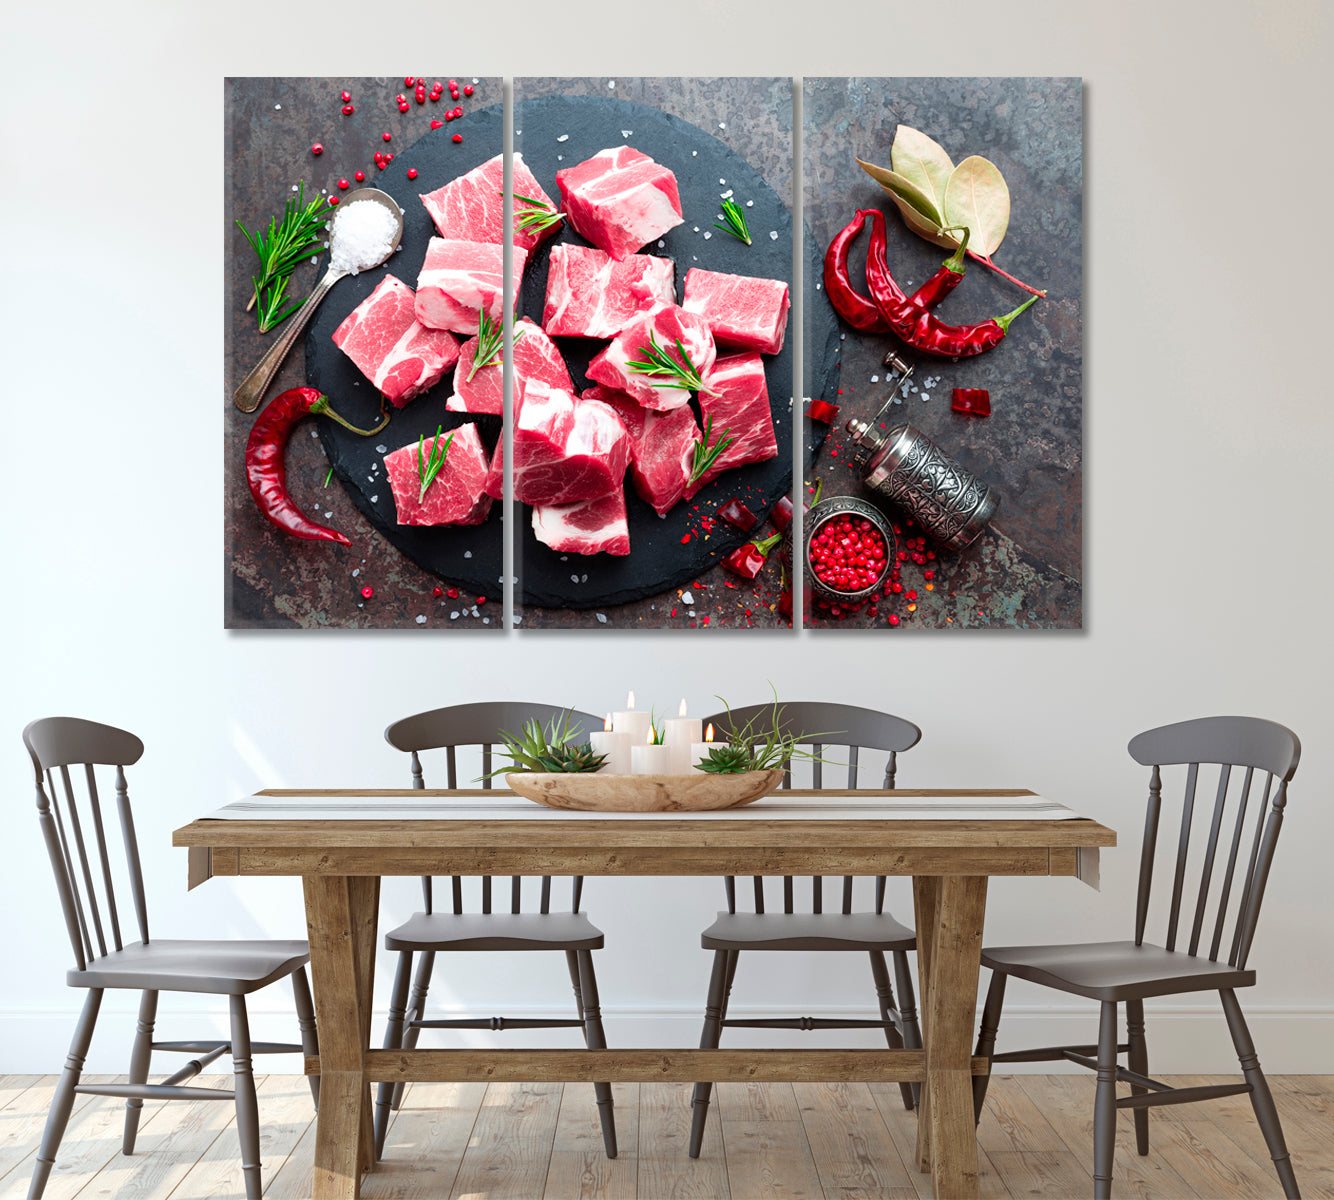 Raw Sliced Meat Canvas Print ArtLexy 3 Panels 36"x24" inches 